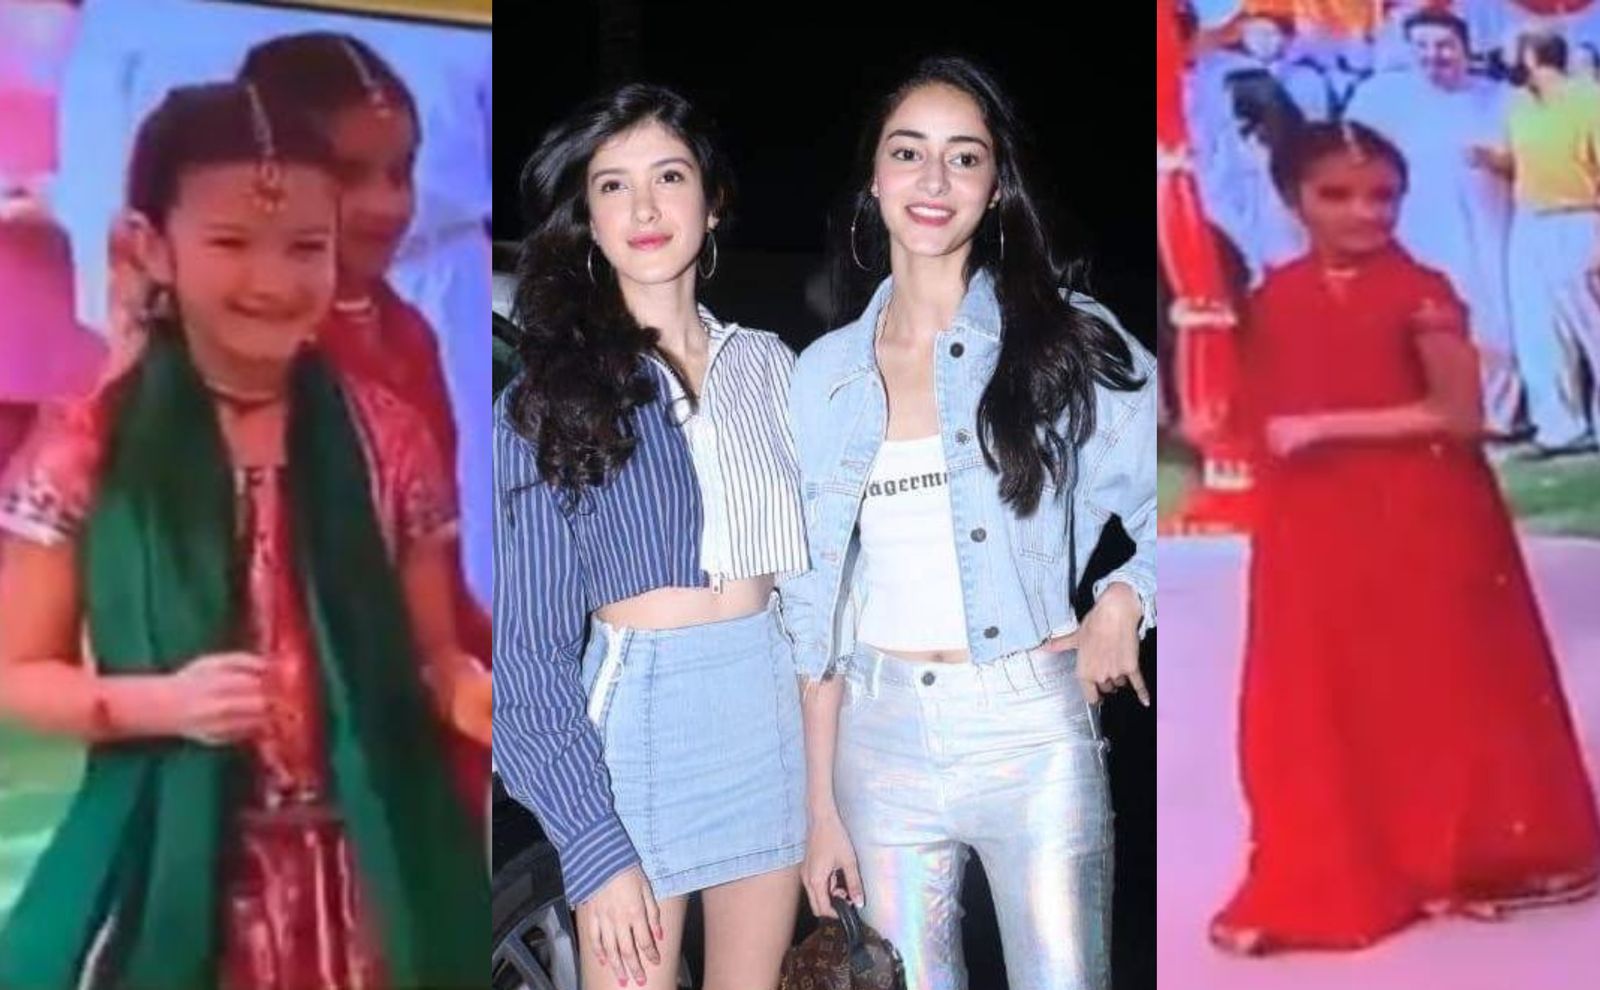 Ananya Panday And Shanaya Kapoor’s Throwback Video From Riddhima Kapoor’s Wedding Will Melt Your Heart; Watch